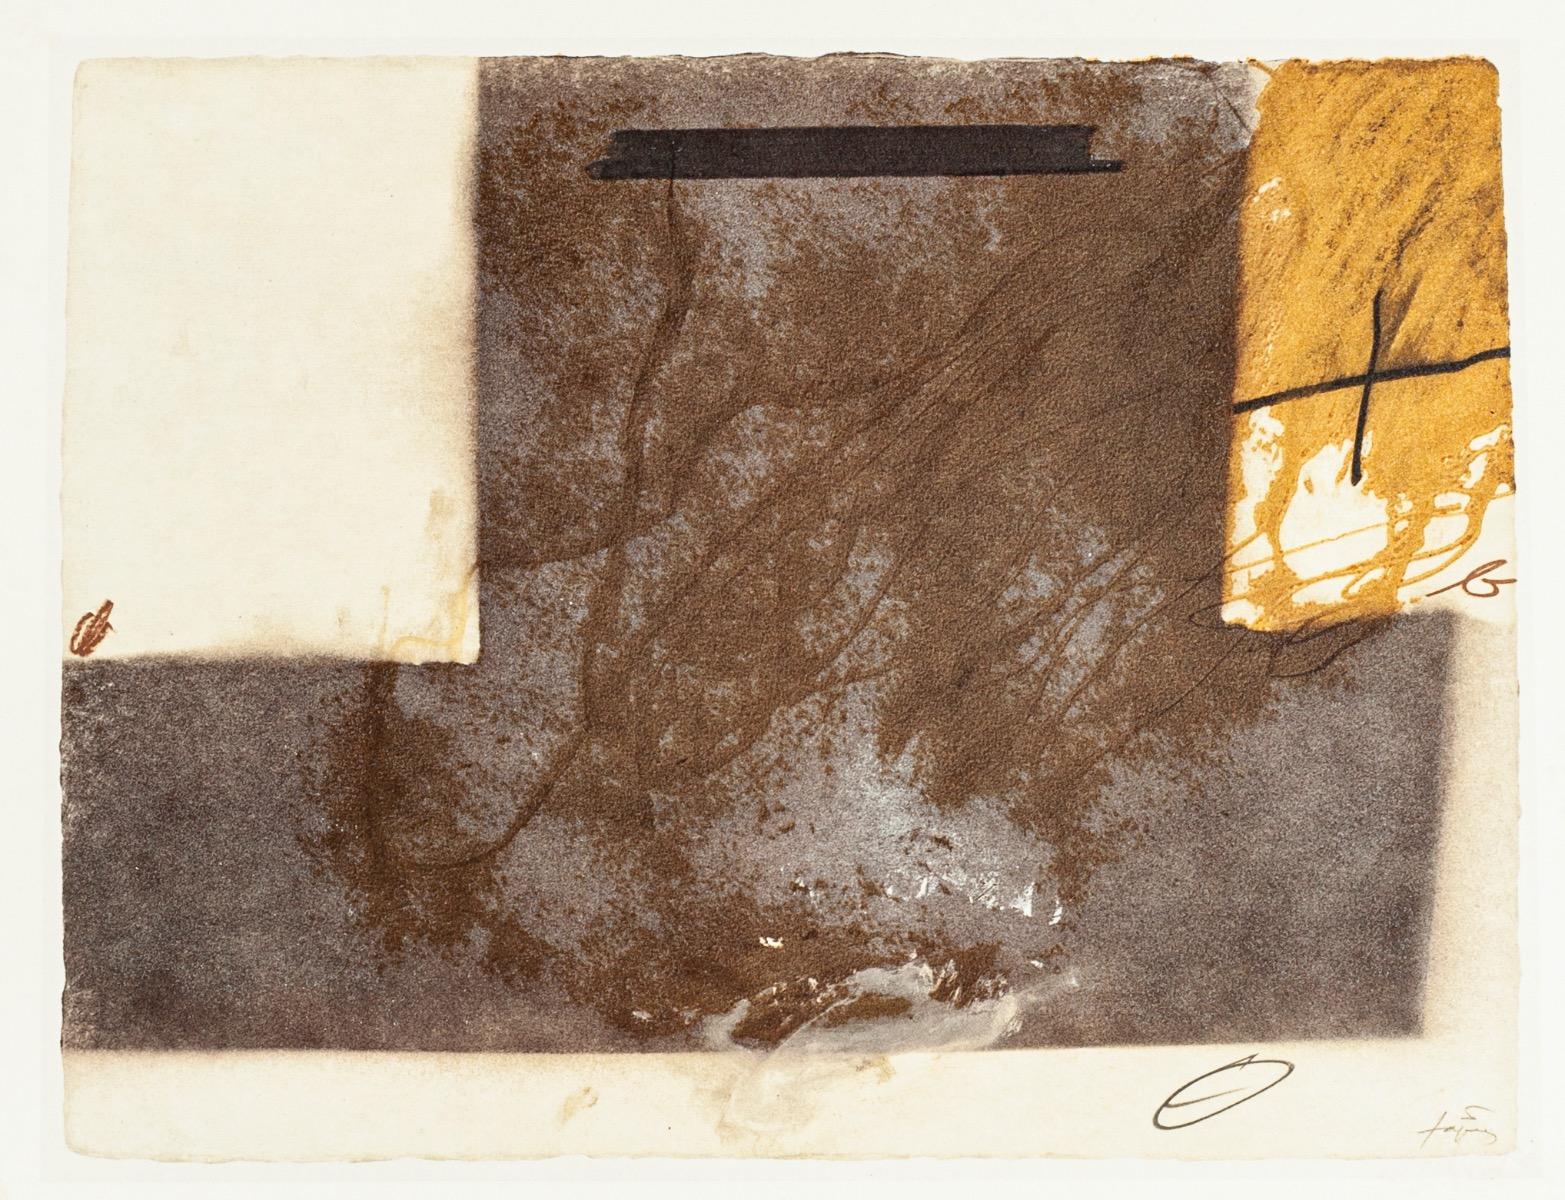 Antoni Tàpies (after) Abstract Print - T Grey Up Side Down - Vintage Offset Print After Antoni Tàpies - 1982